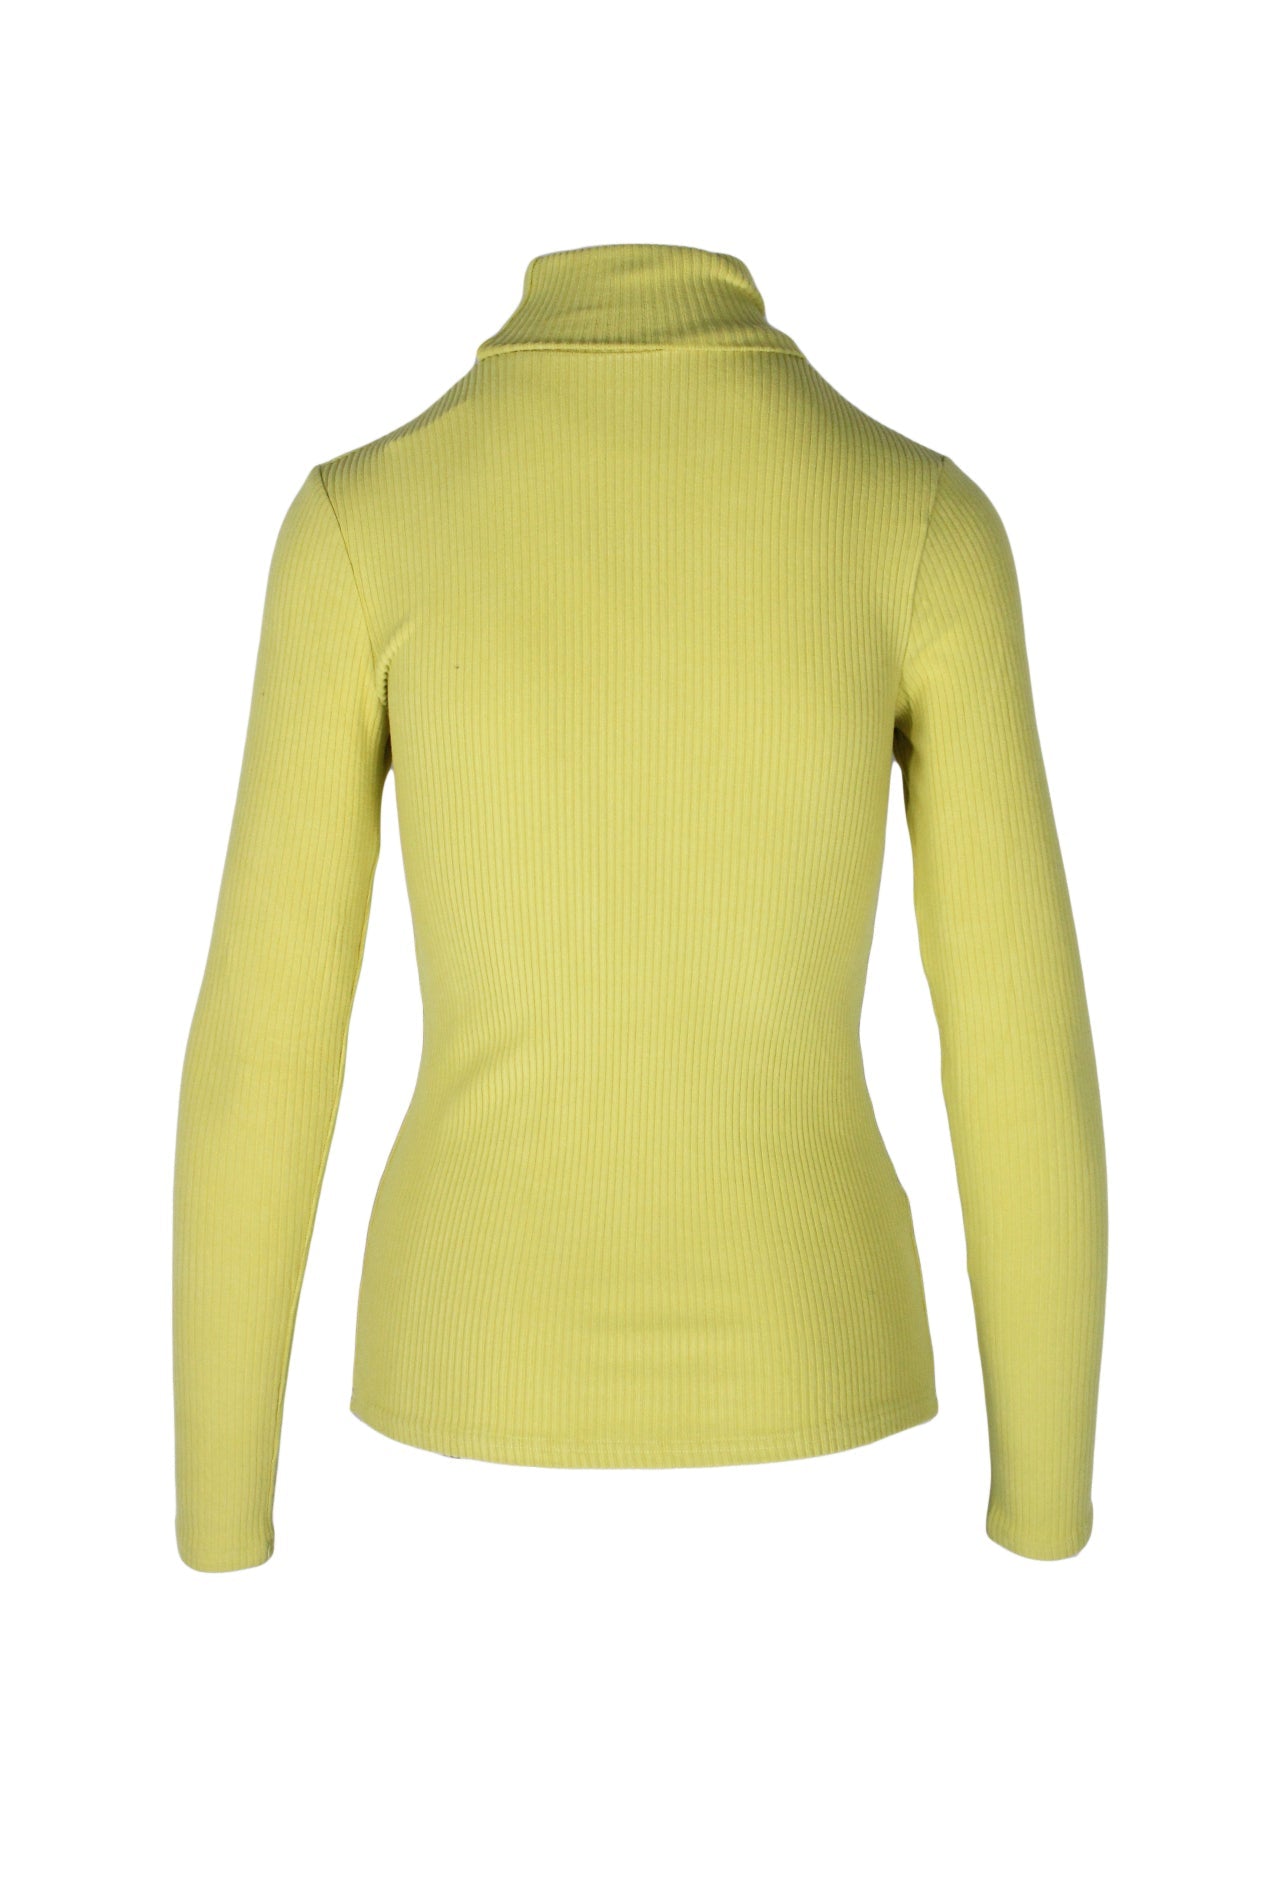 back angle unlabeled chartreuse rib knit top on feminine mannequin torso.